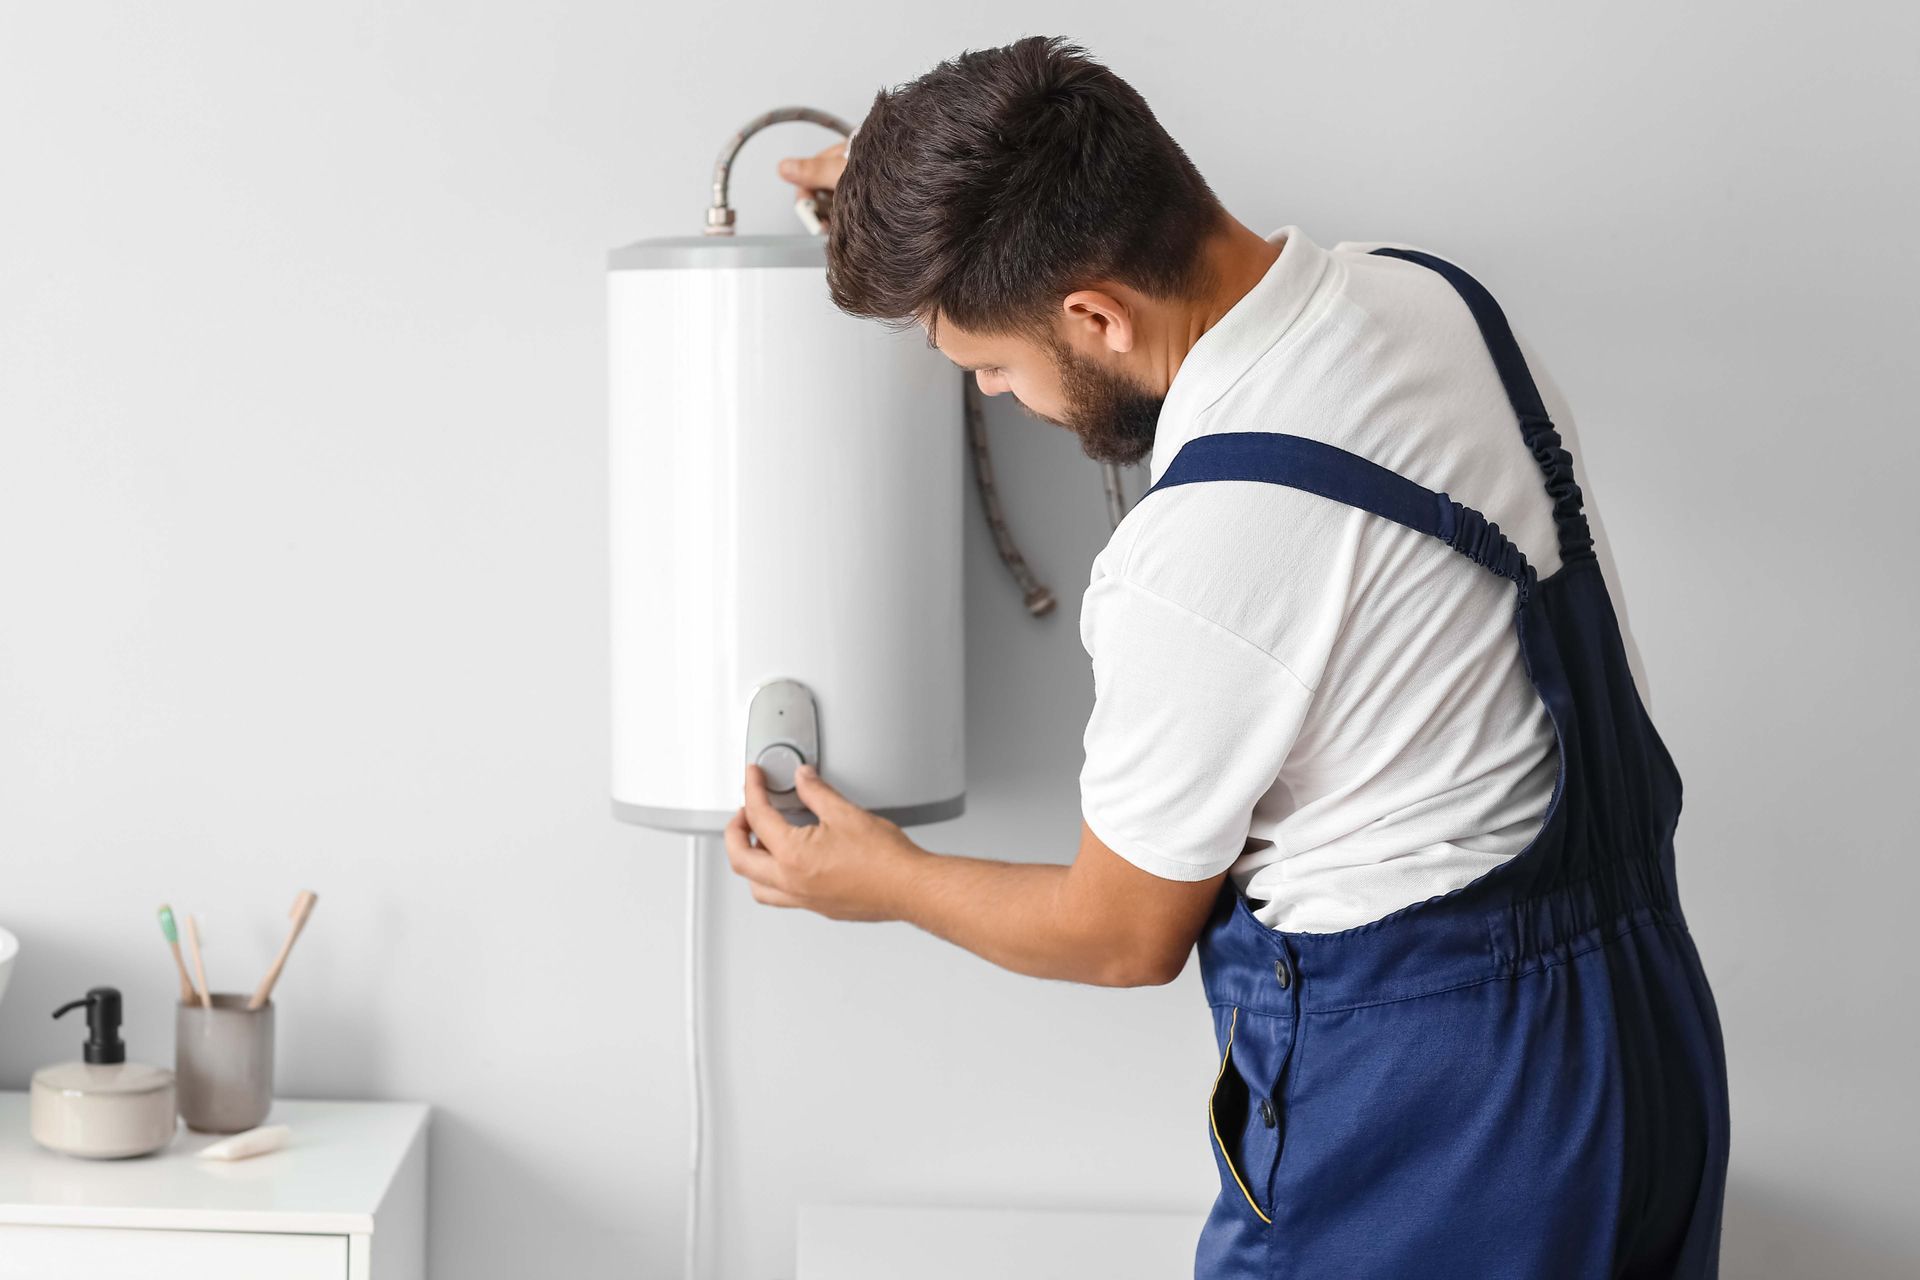 a man is installing a water heater on a wall